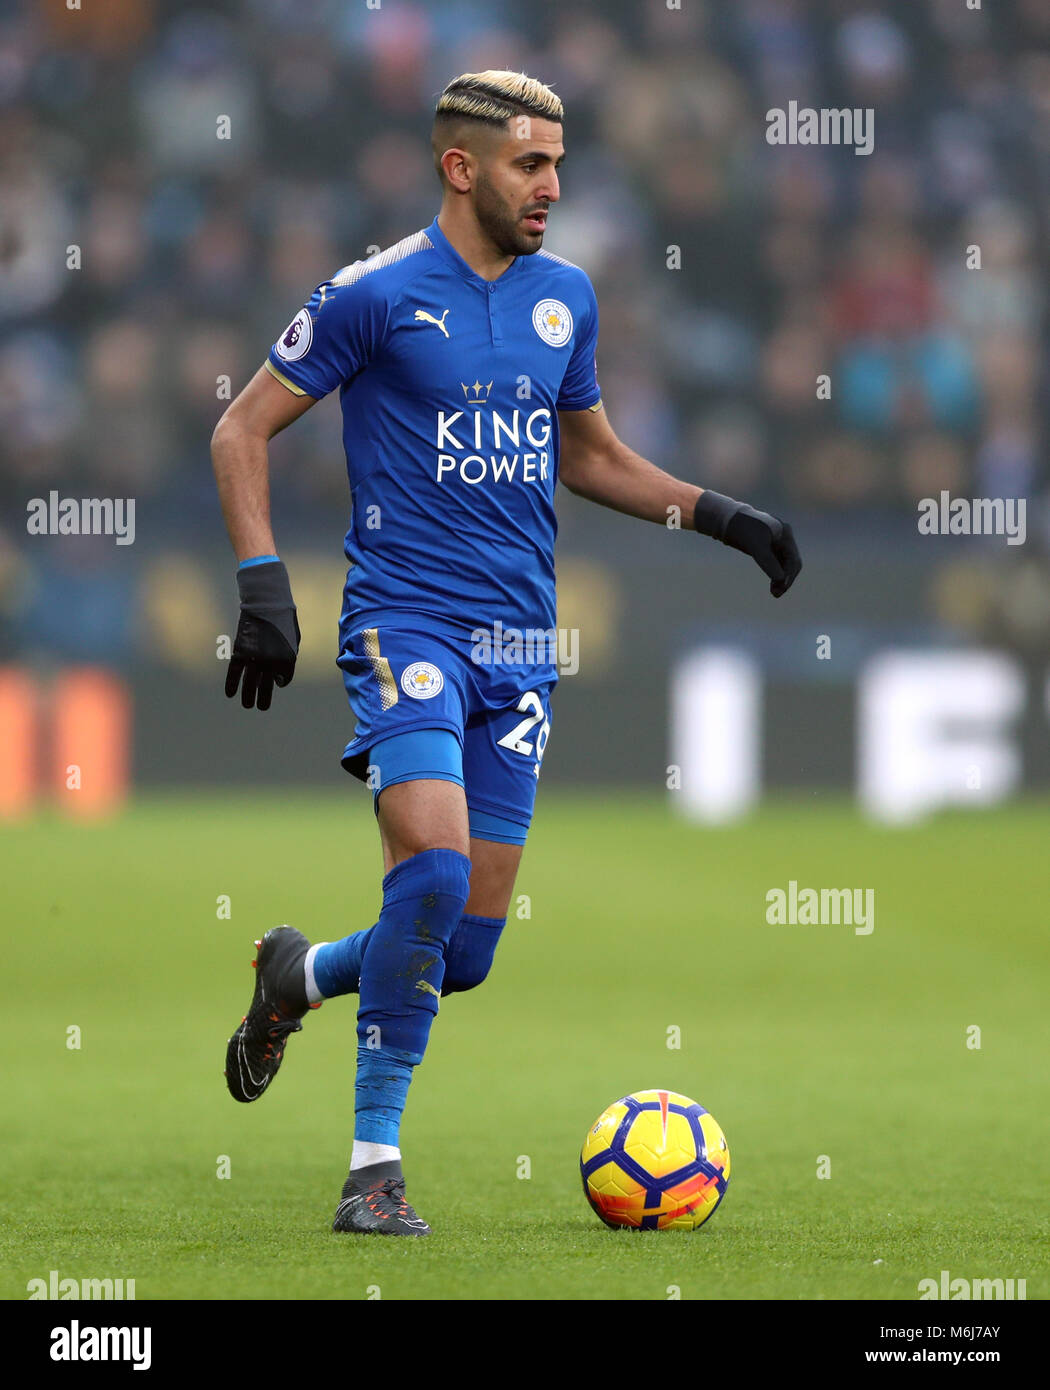 Leicester City's Riyad Mahrez during the Premier League match at the King Power Stadium, Leicester. PRESS ASSOCIATION Photo. Picture date: Saturday March 3, 2018. See PA story SOCCER Leicester. Photo credit should read: Tim Goode/PA Wire. RESTRICTIONS: No use with unauthorised audio, video, data, fixture lists, club/league logos or 'live' services. Online in-match use limited to 75 images, no video emulation. No use in betting, games or single club/league/player publications. Stock Photo